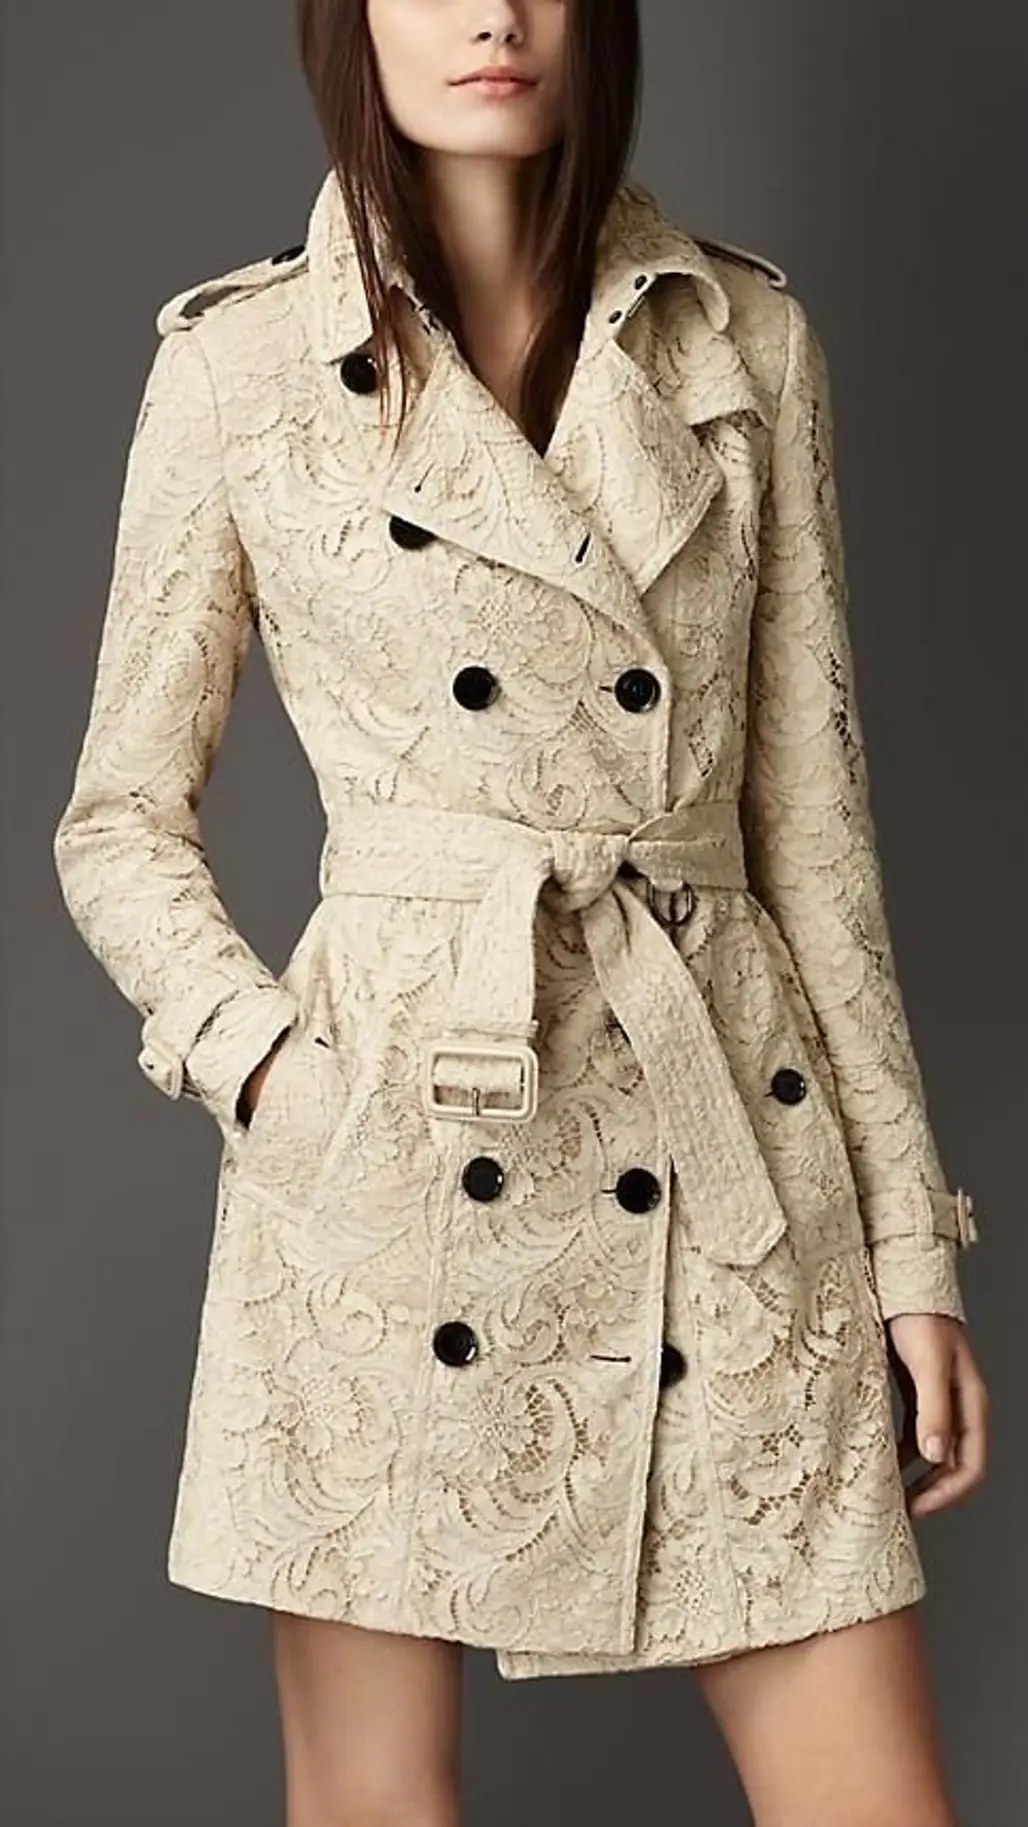 Cotton Lace Trench Coat